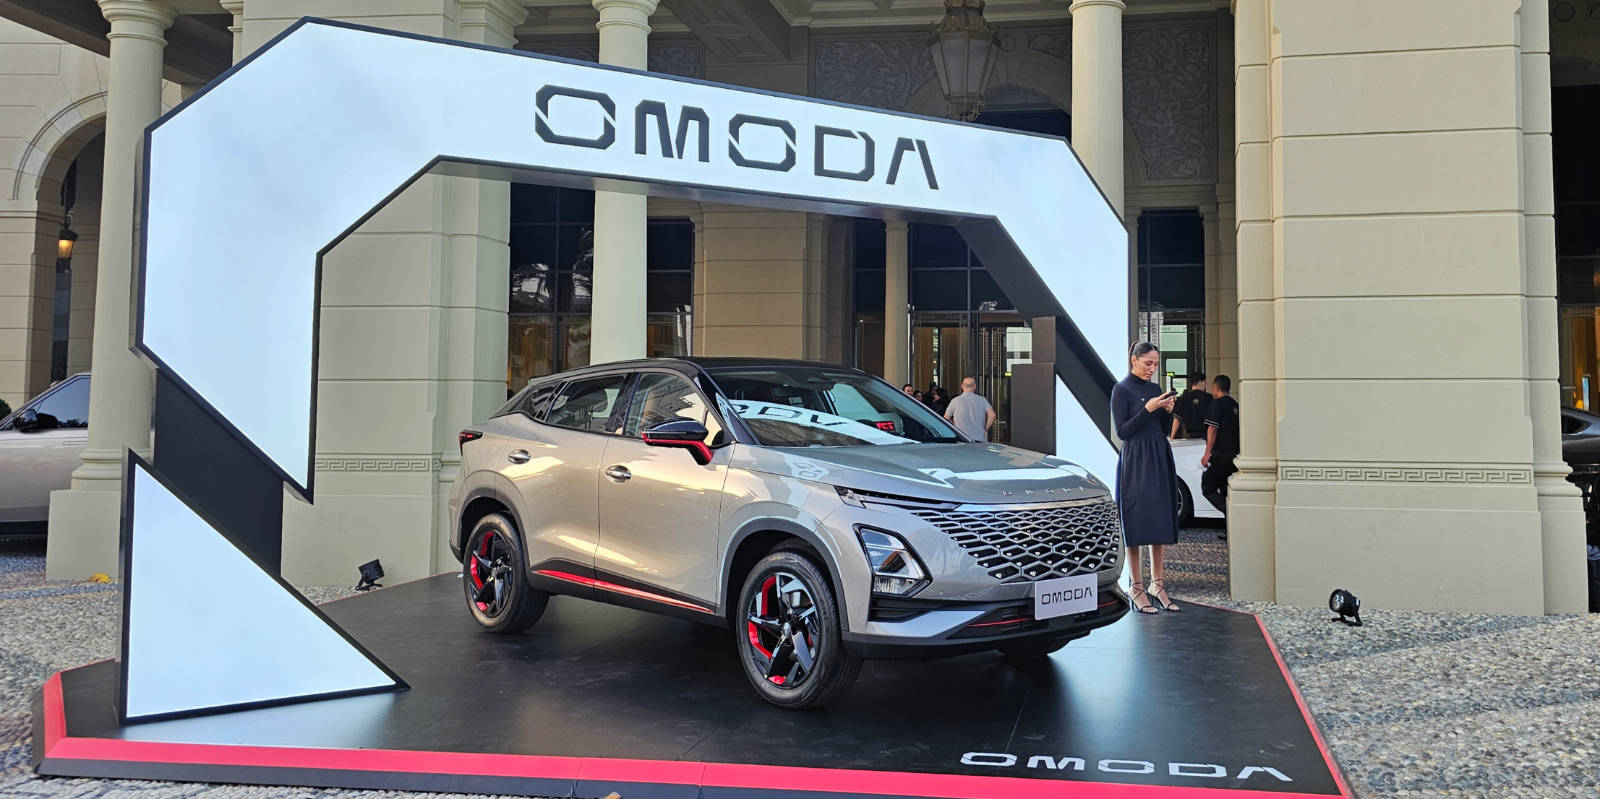 New Omoda C5 Showcased For The First Time Ahead Of Launch In The UAE